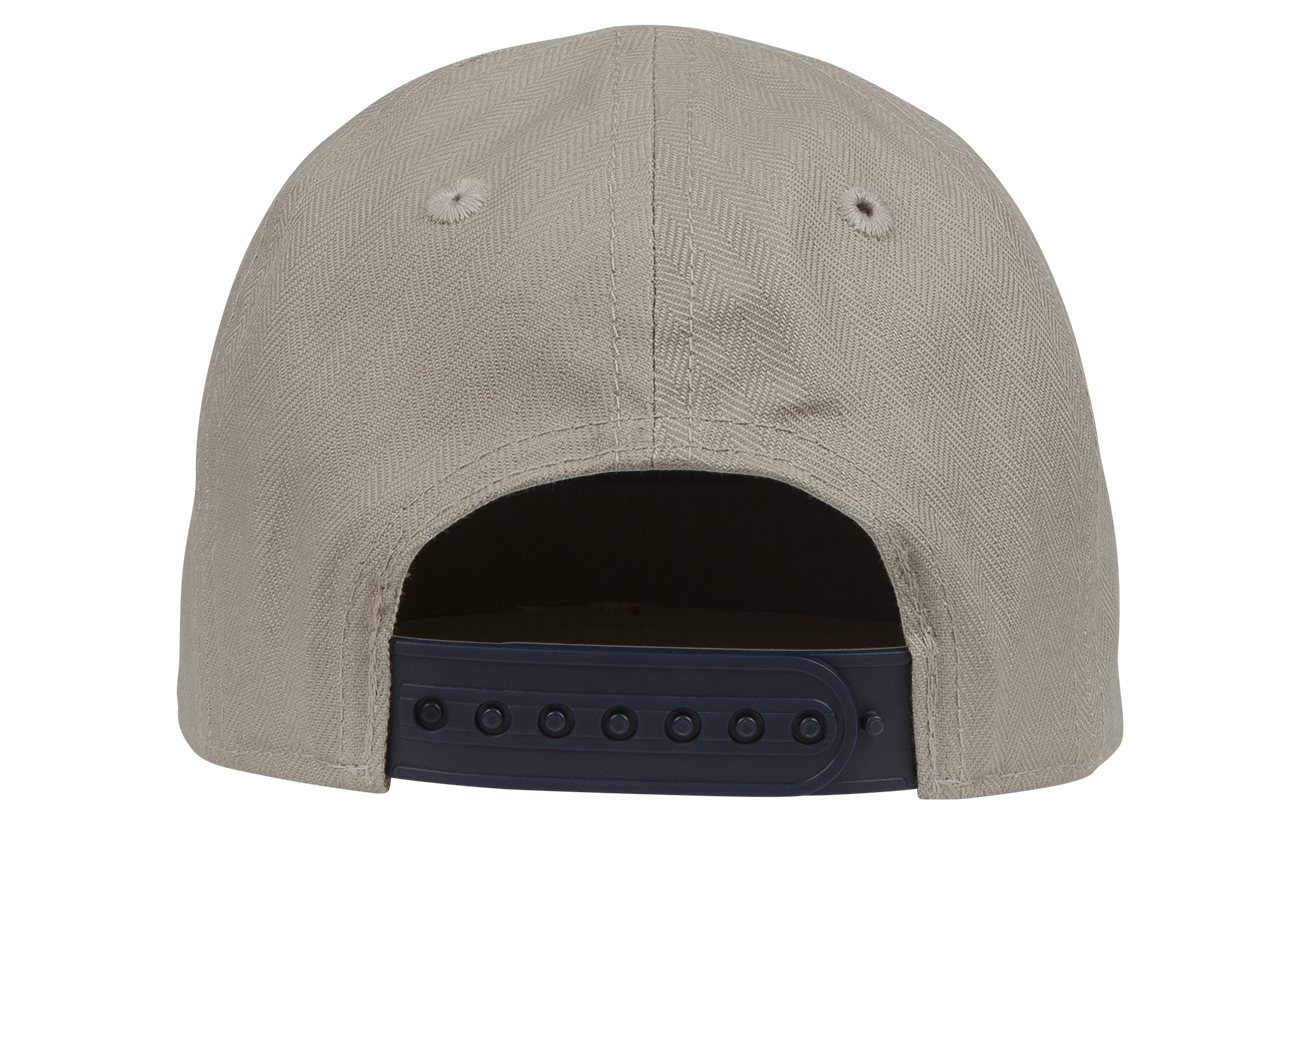 Hamilton Hat: Youth (3 years - 6 years) / Beige / Standard Fit